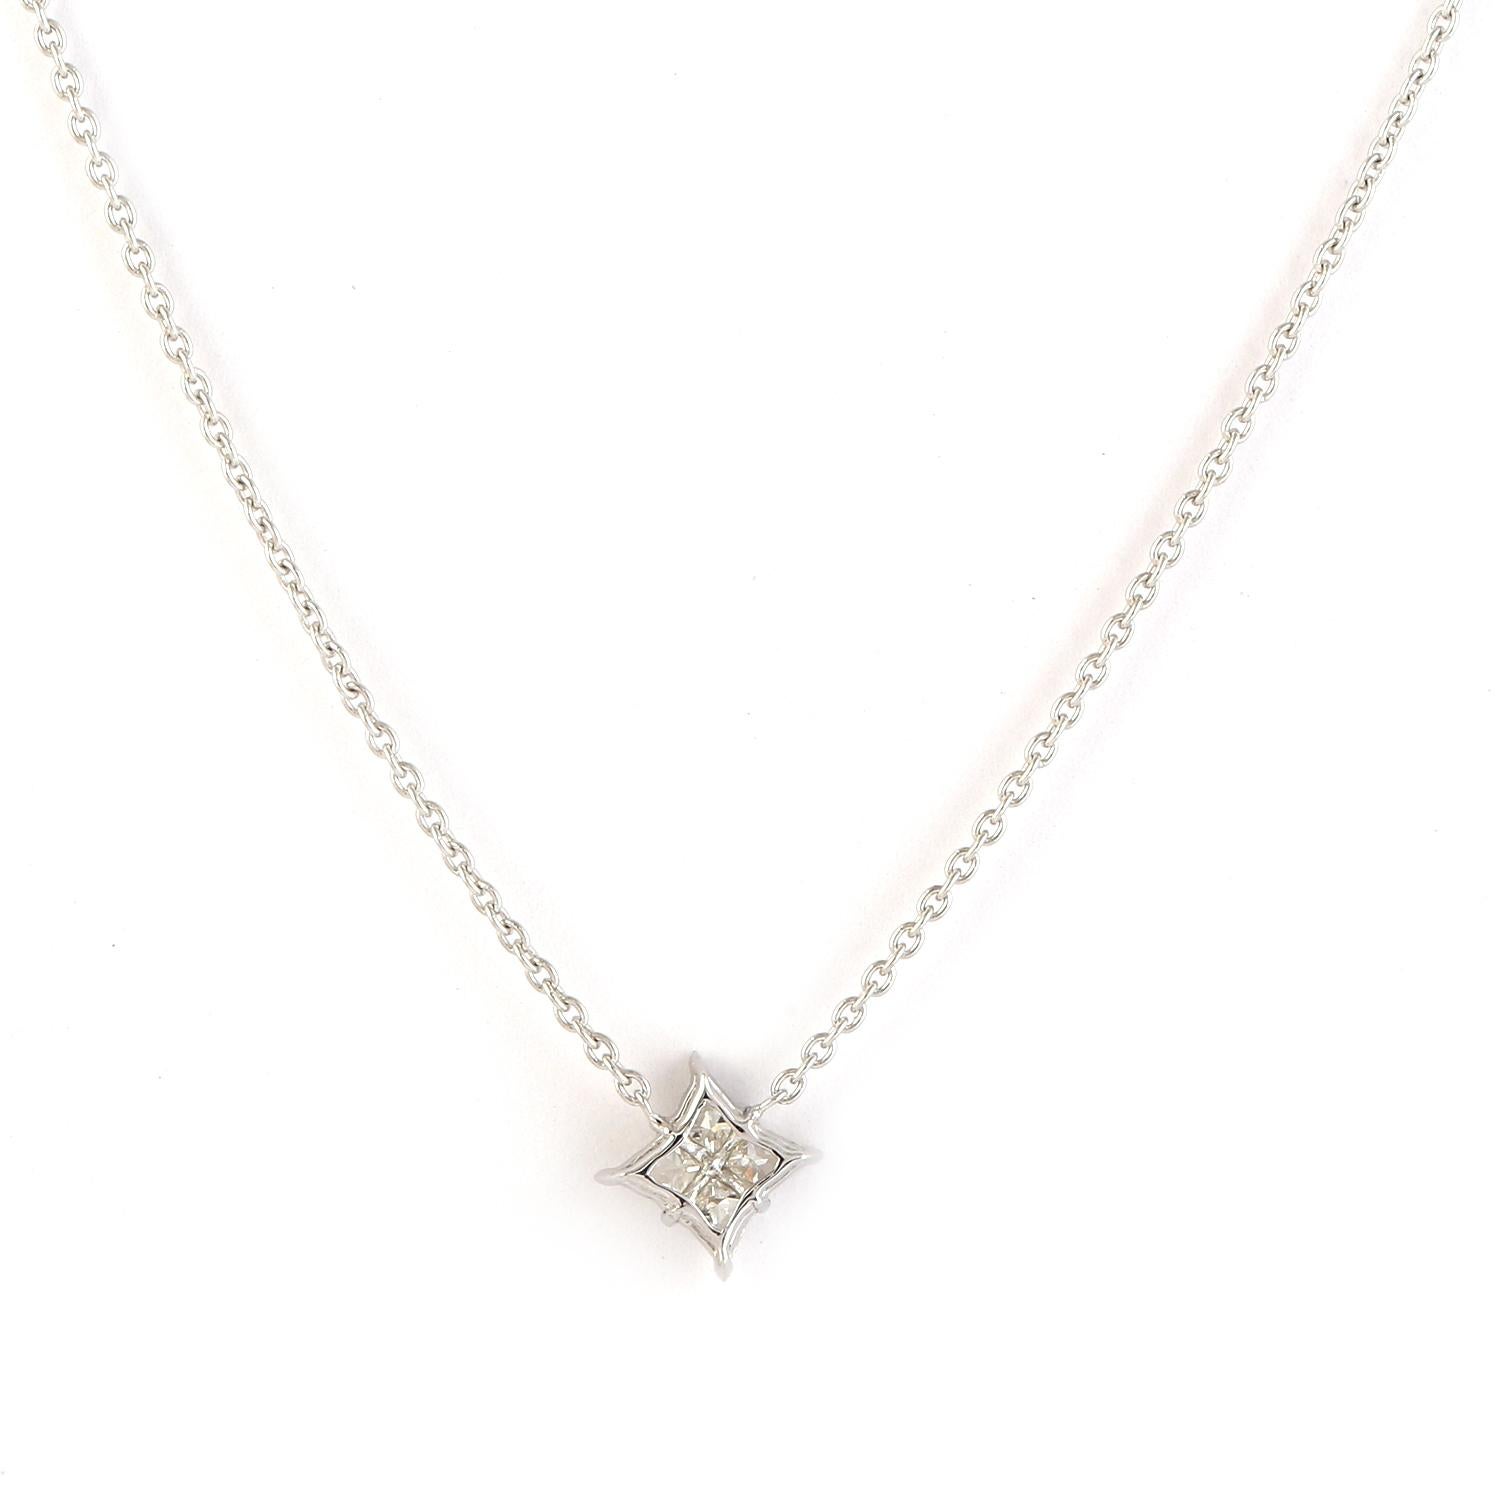 Mixed Cut Stunning Necklace with Diamond Studded Star Pendant Made in 18k White Gold For Sale